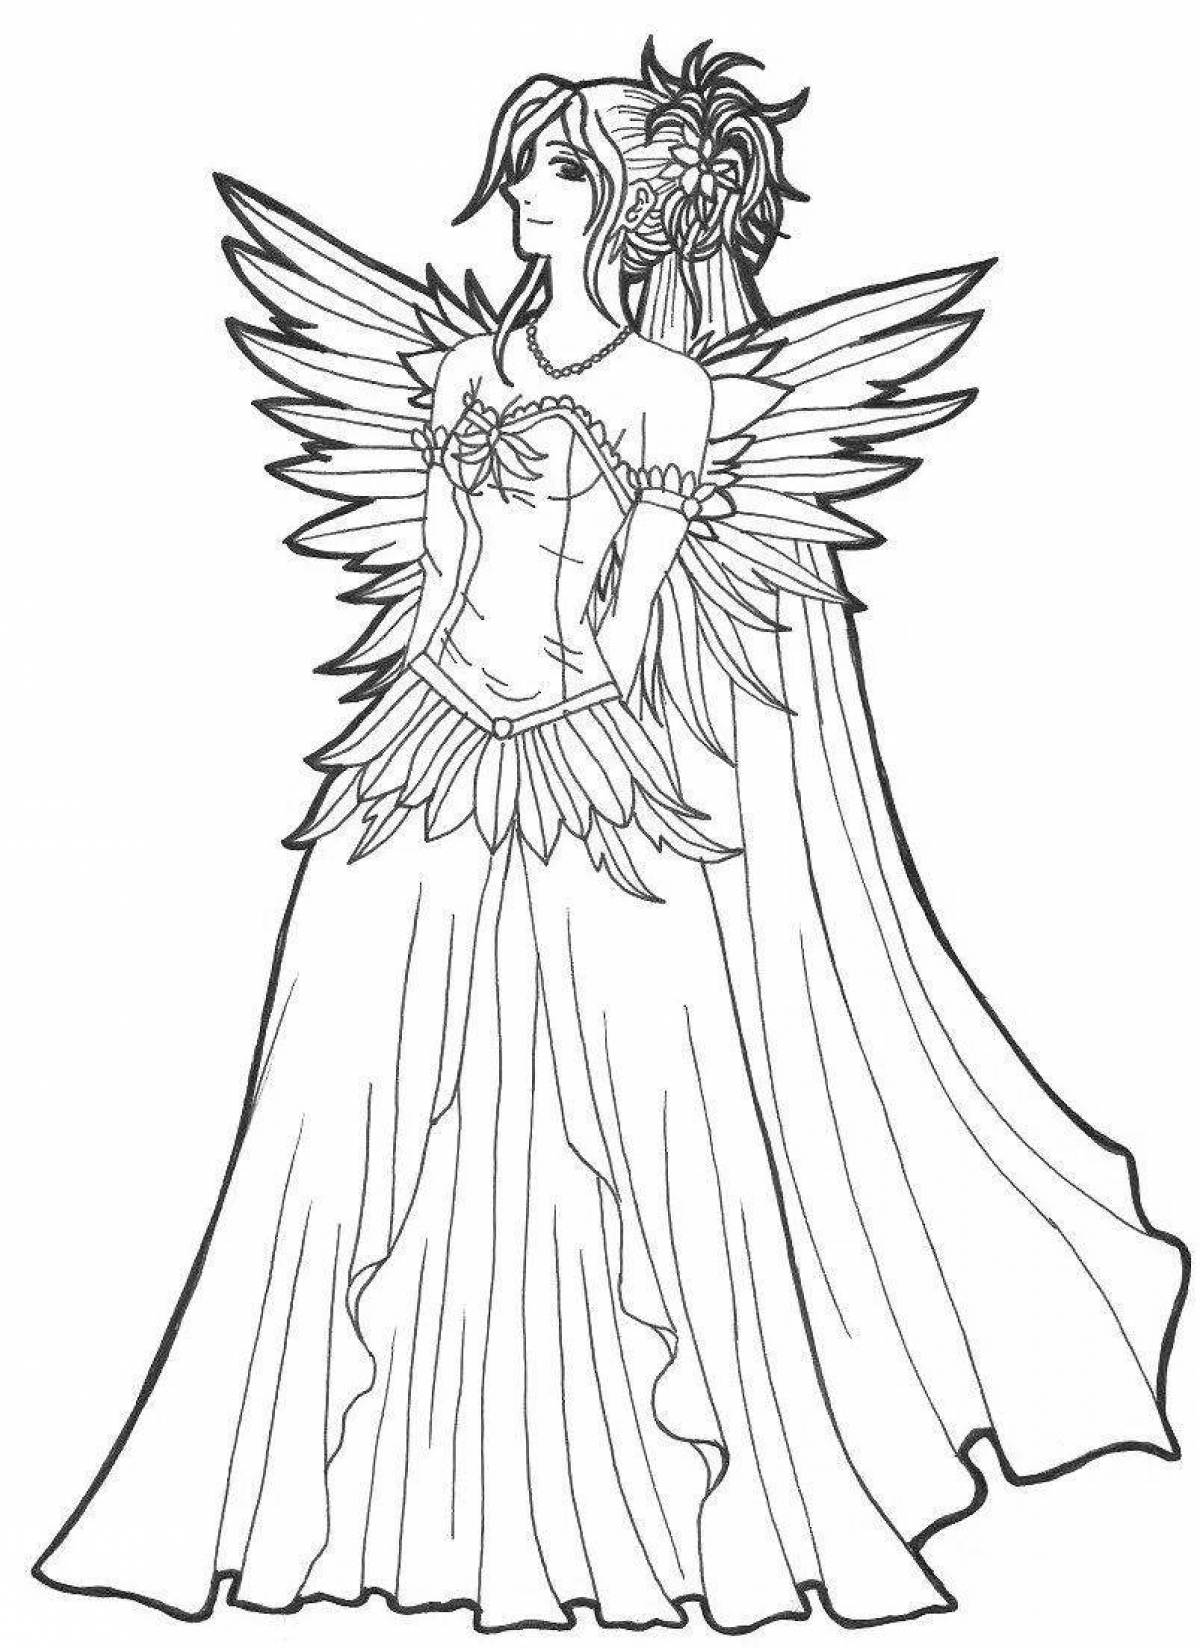 Awesome bride coloring page